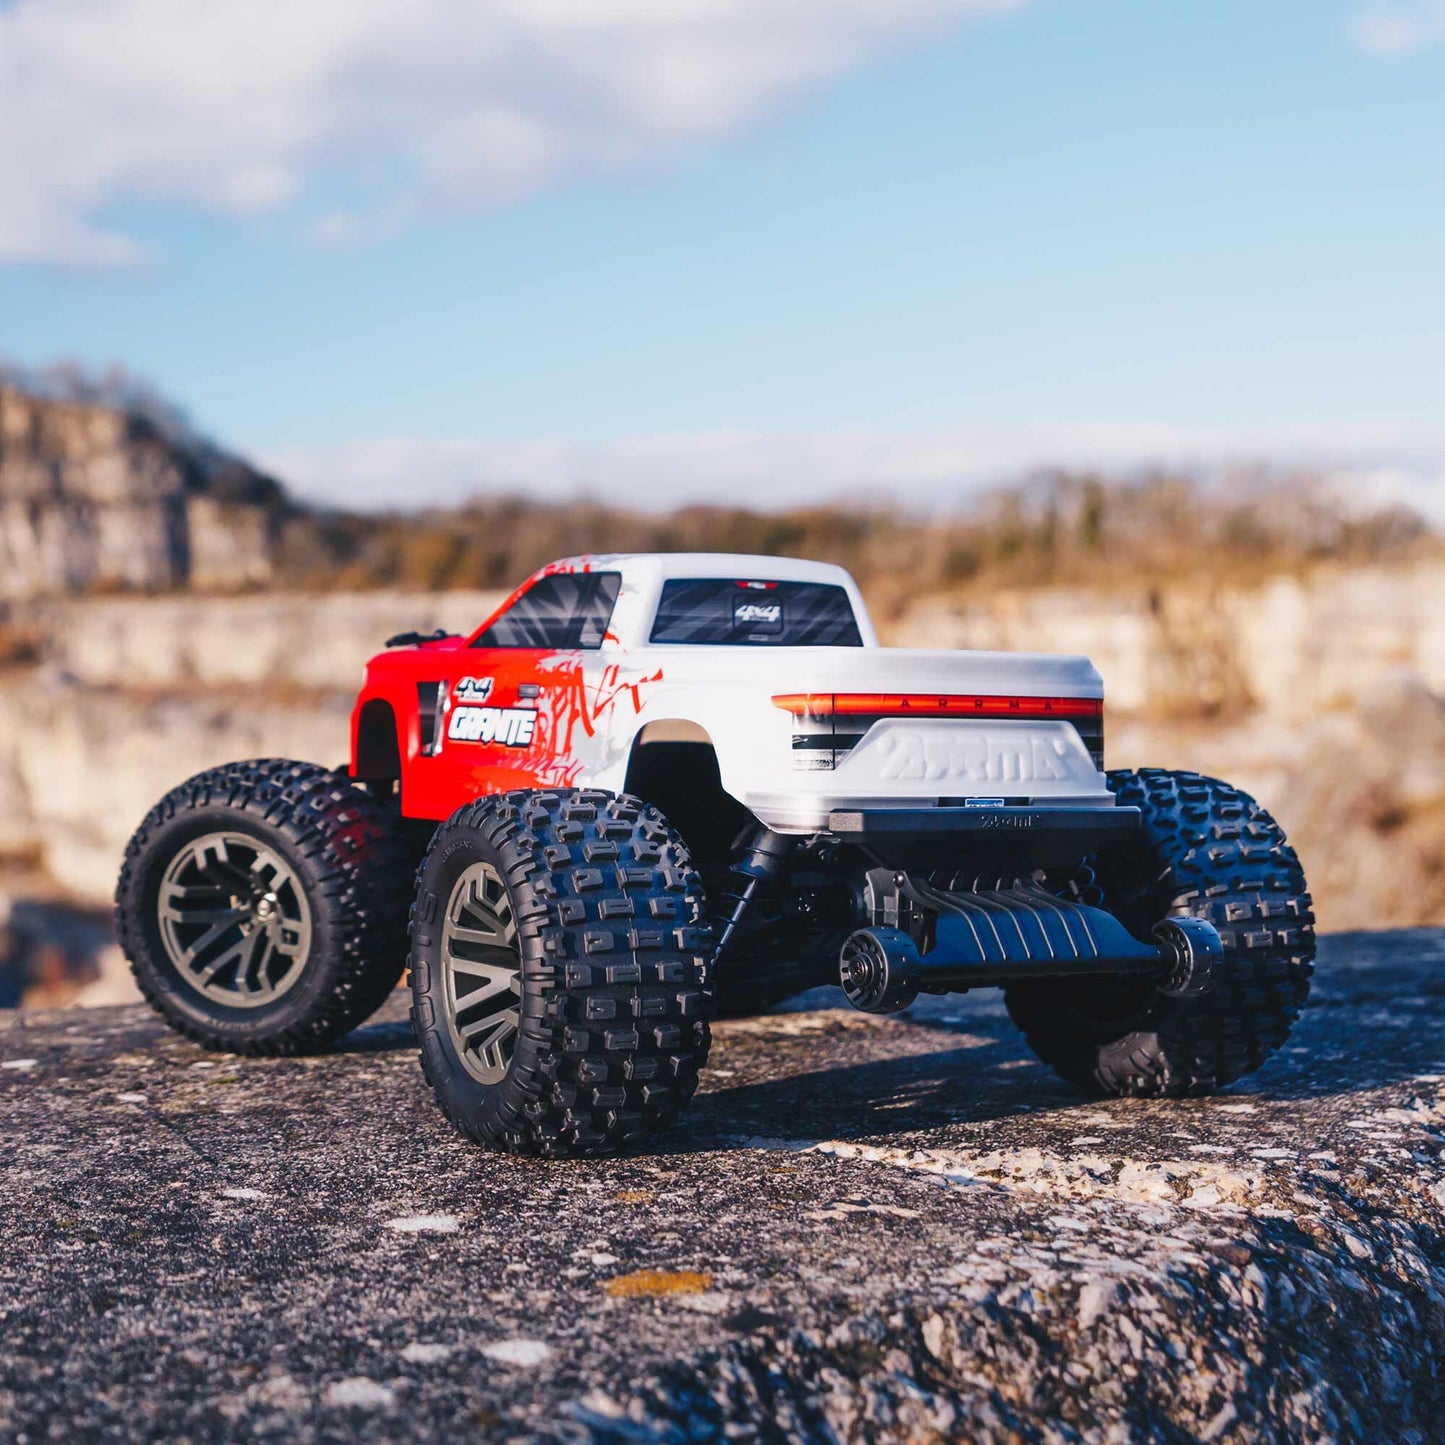 1/10 GRANITE 4X4 V3 3S BLX Brushless Monster Truck RTR, Red - Dirt Cheap RC SAVING YOU MONEY, ONE PART AT A TIME